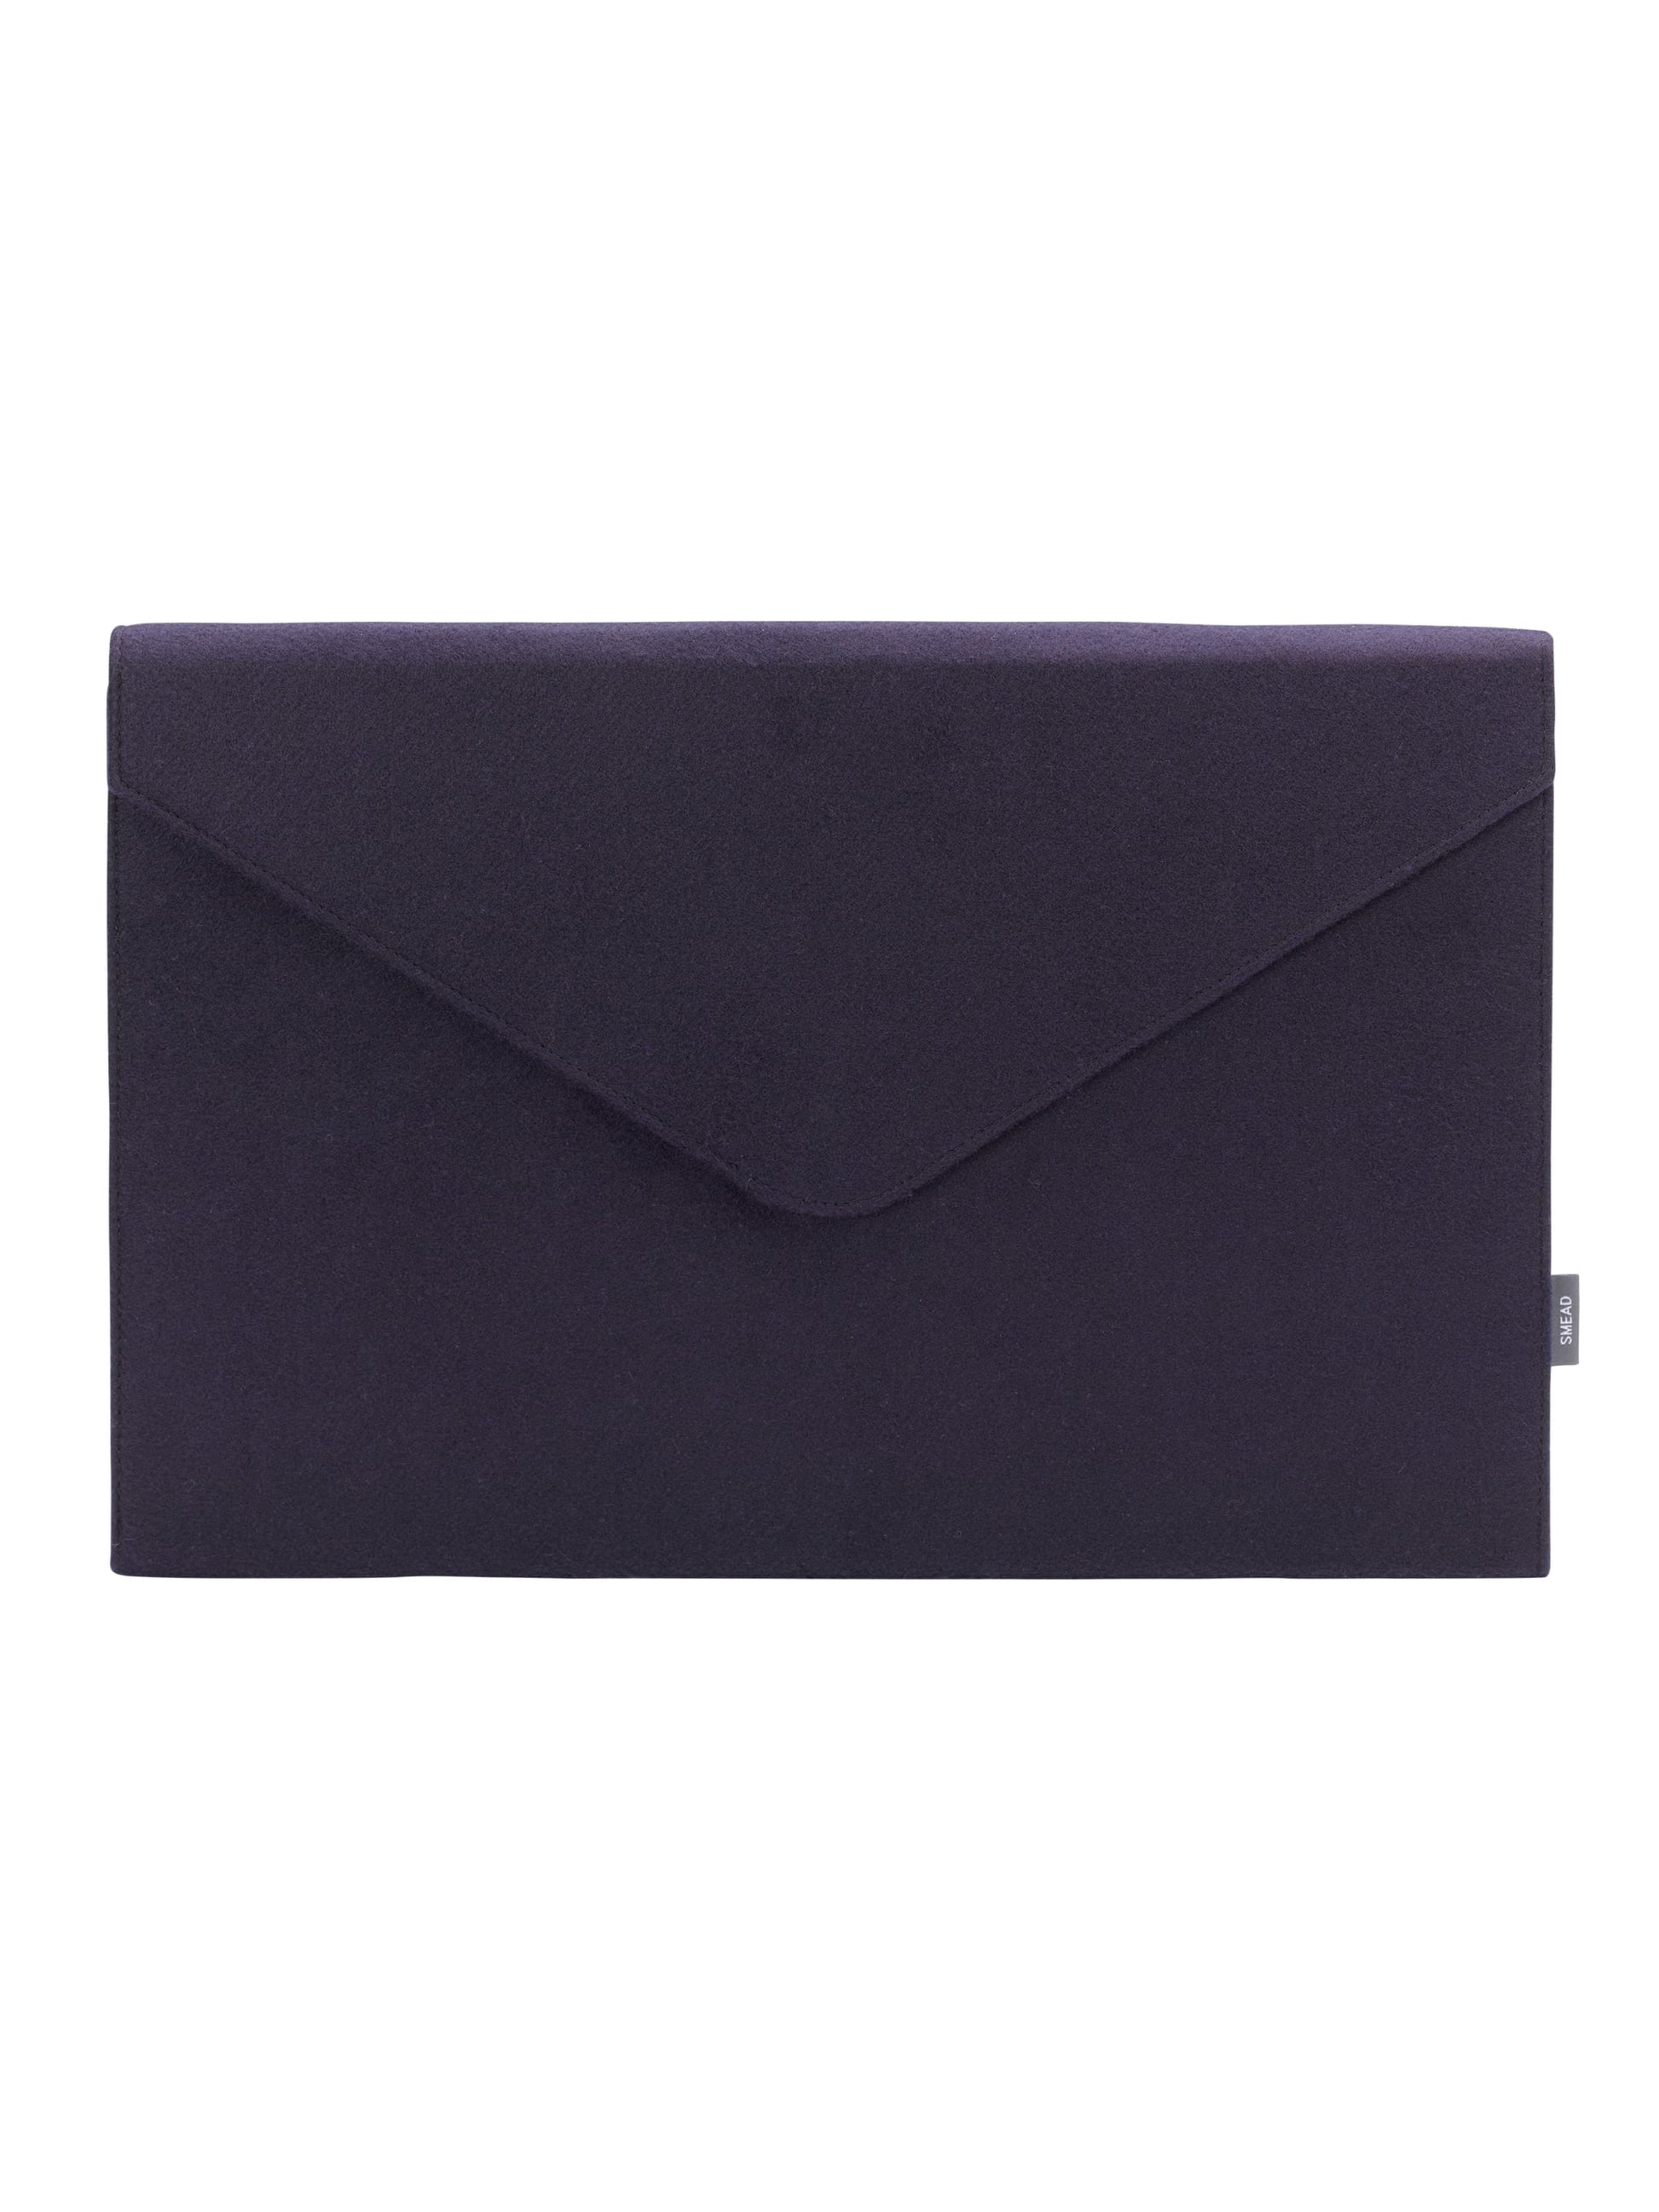 Soft Touch Cloth Expanding Files, 2-Inch Expansion, Dark Blue Color, 11X17 Size, Set of 1, 086486709255